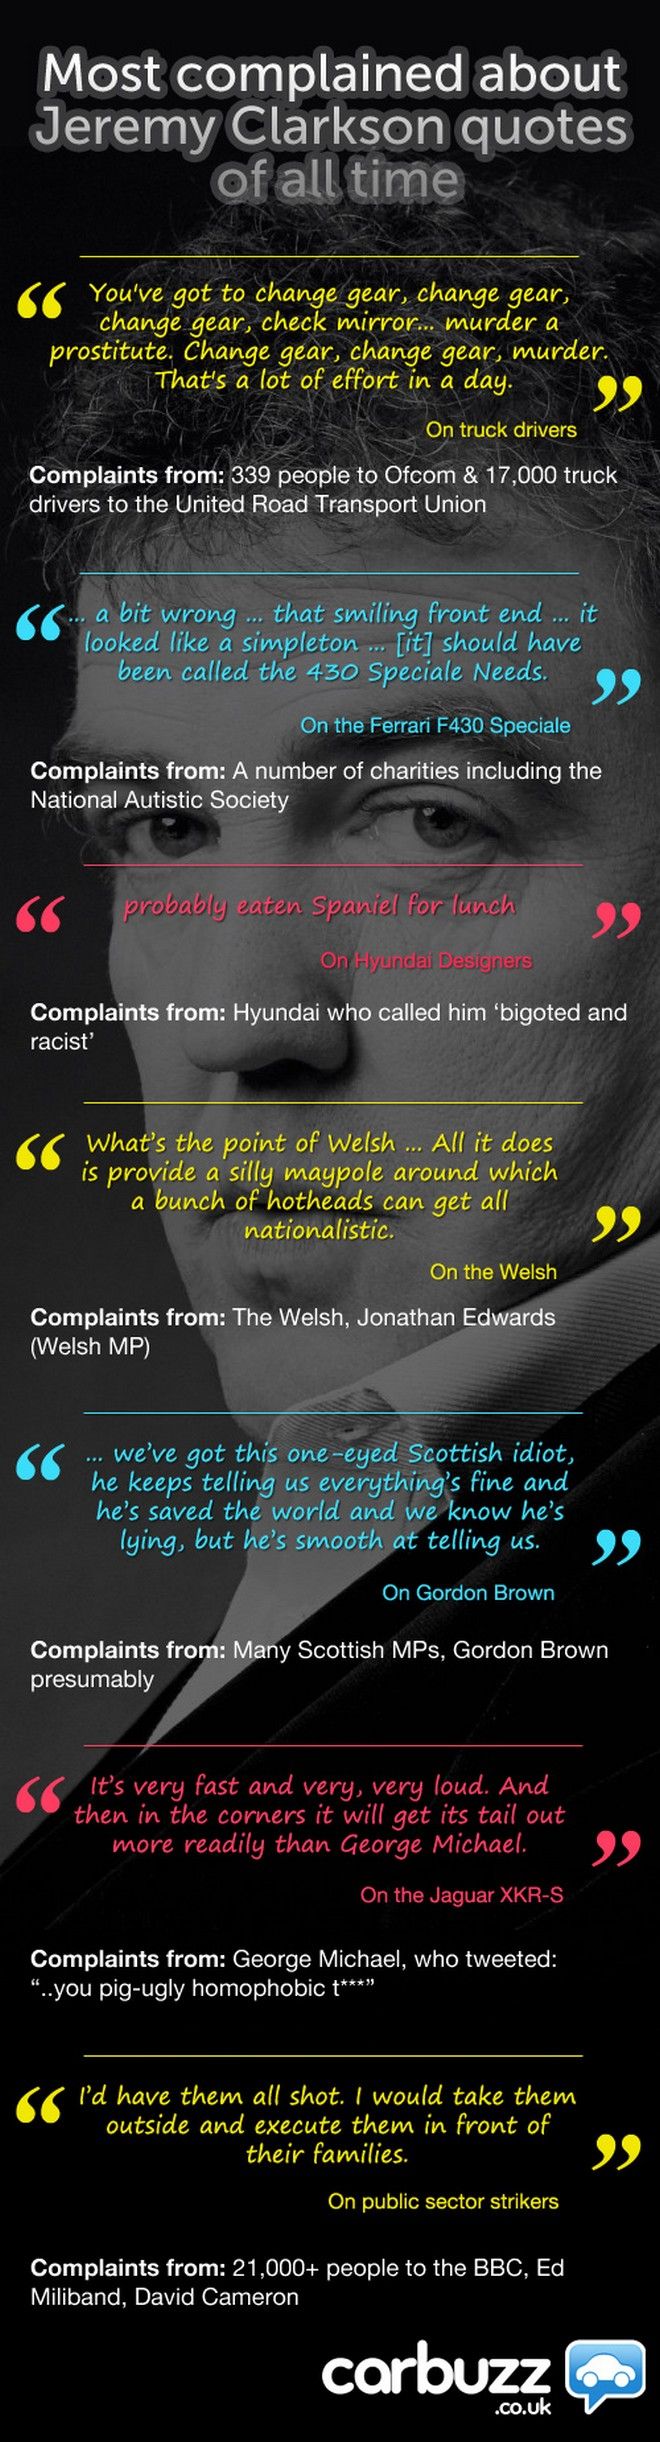 jeremy-clarkson-most-complained-about-quotes-infographic-3